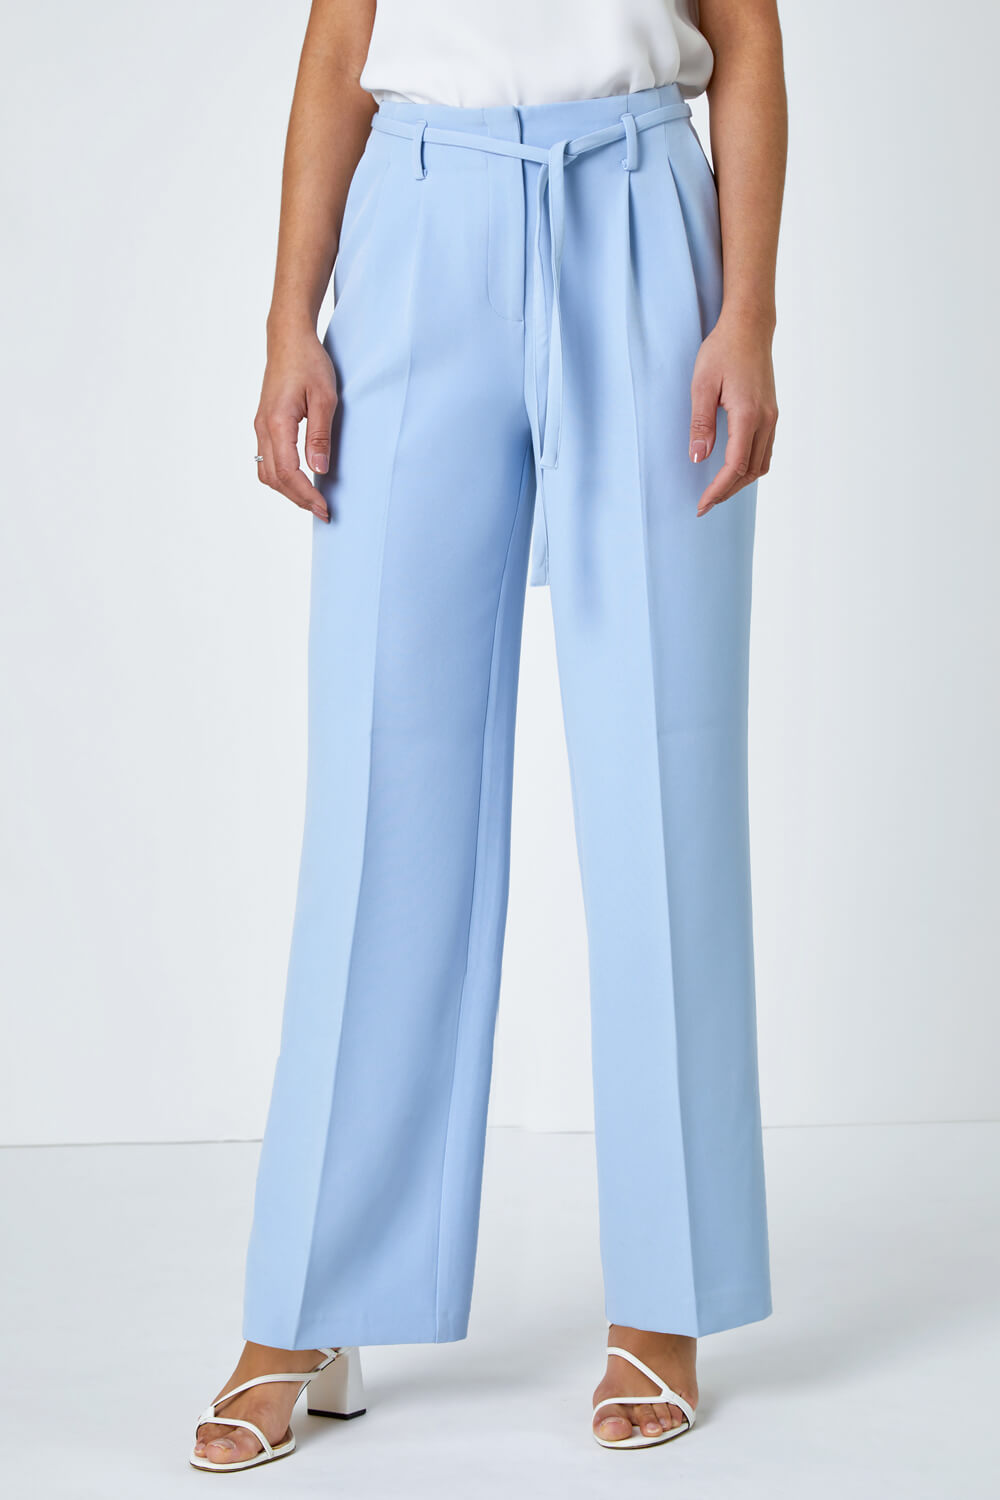 Light Blue  Crepe Stretch Straight Leg Trousers, Image 4 of 7